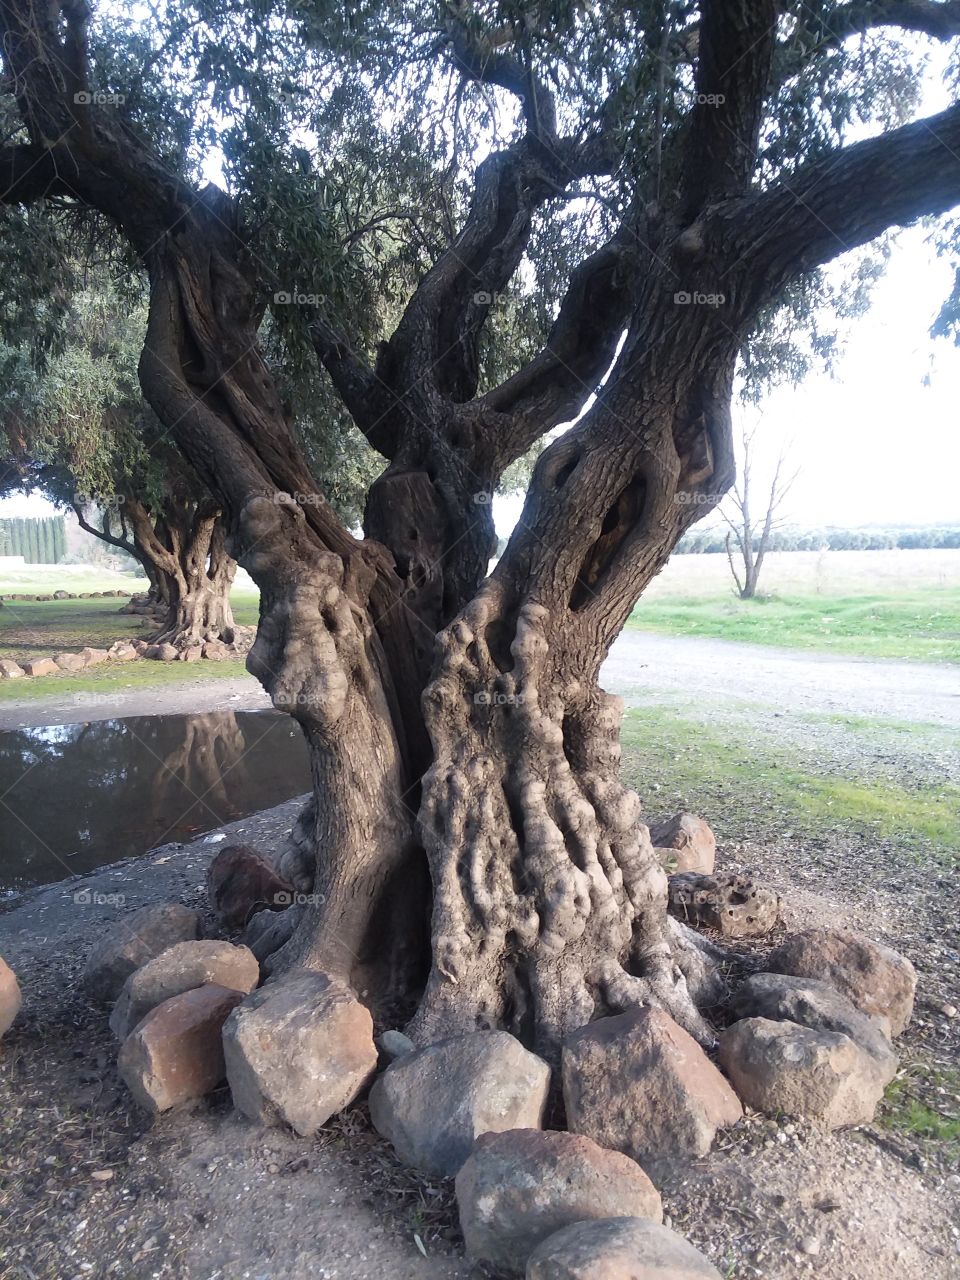 Twists of the Olive Tree